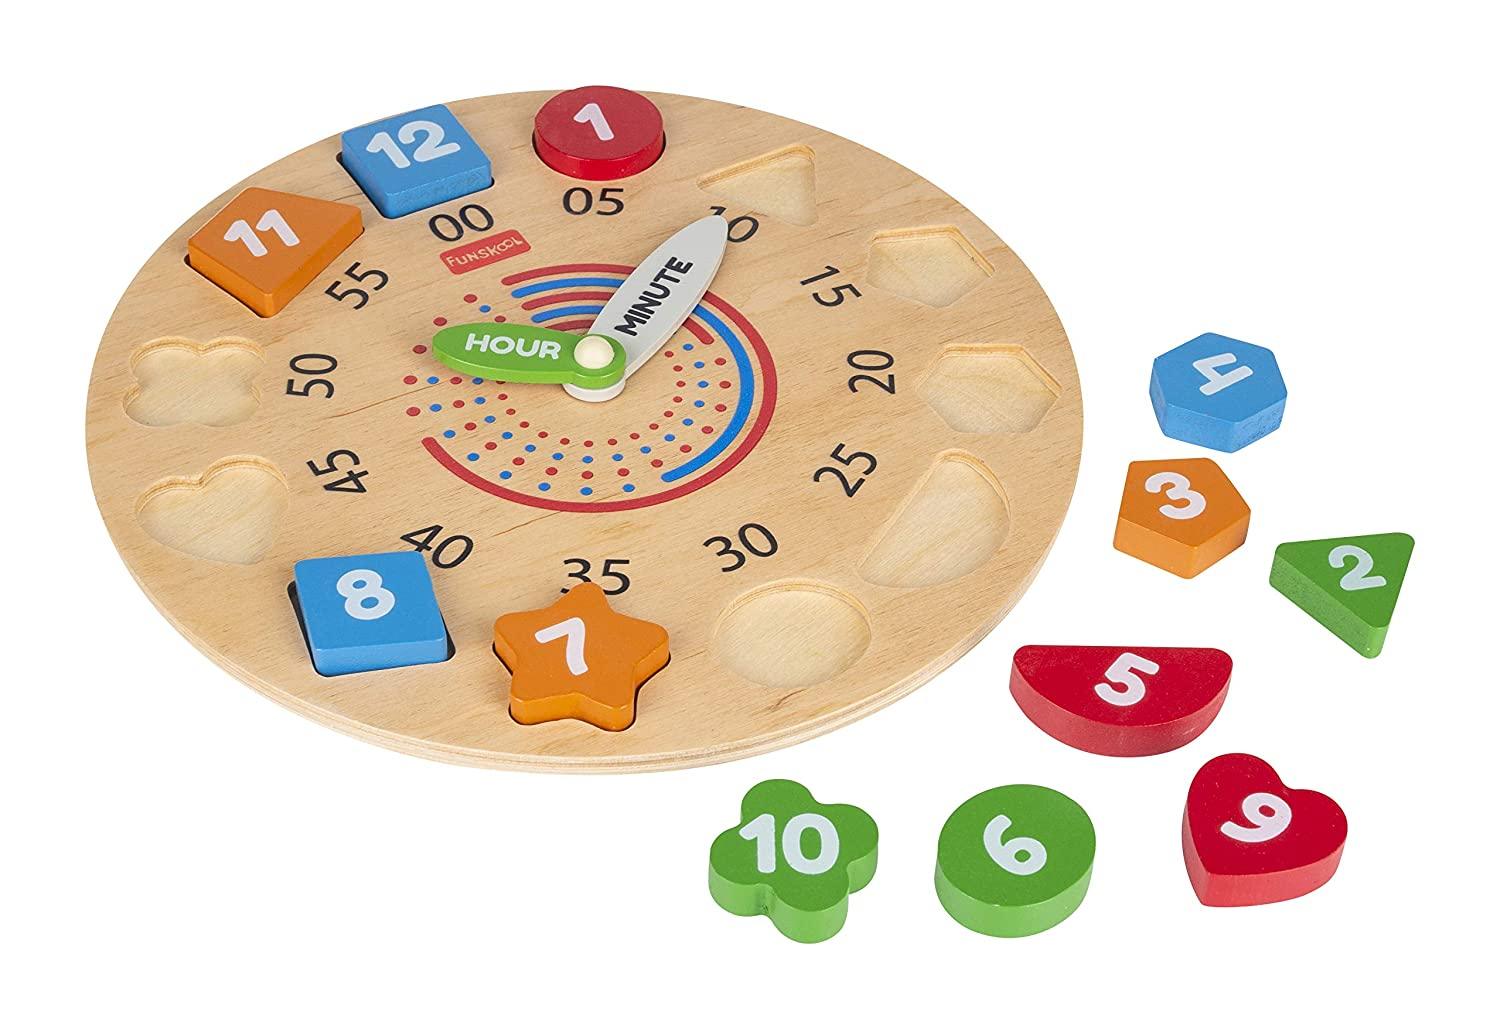 Funskool Giggles My Clock Shape Sorting Clock Puzzle for 3 Years & Above